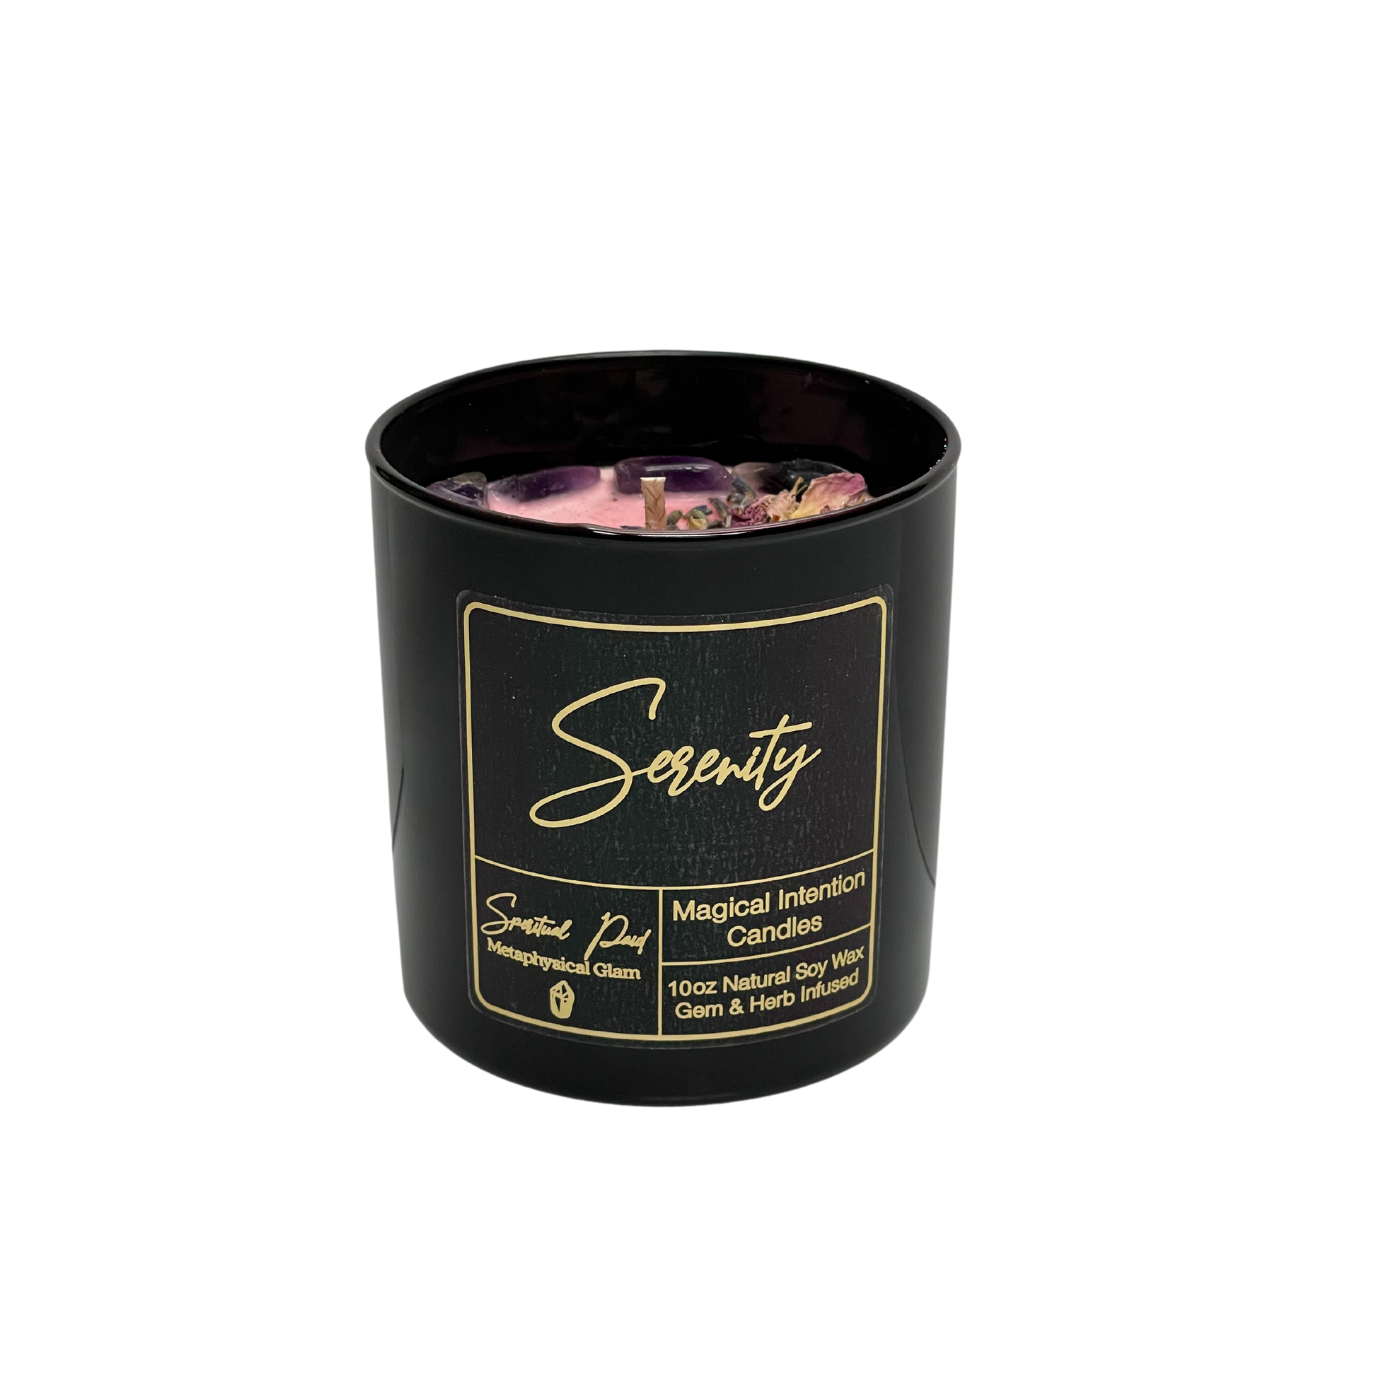 Limited Edition "Serenity" Candle- Peacefulness* Calmness* Meditation